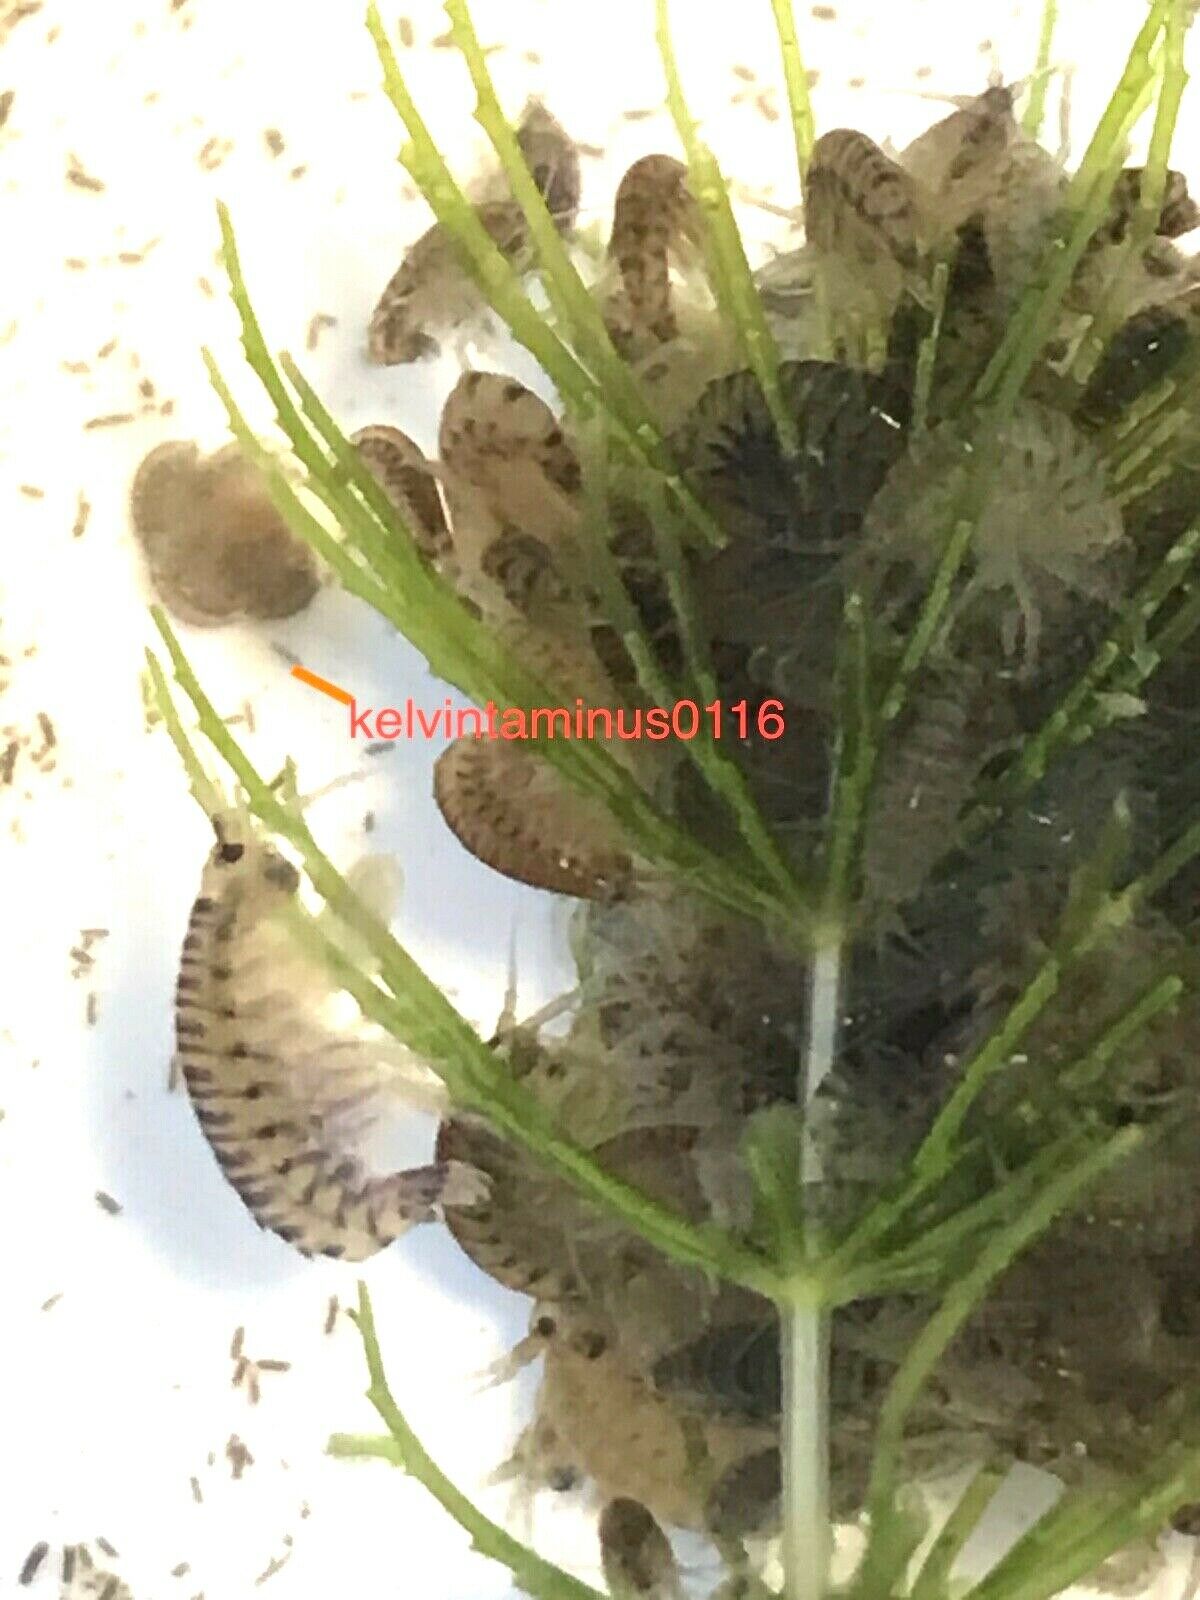 Live Food - Freshwater Scuds/ Gammarus/ Amphipods Multiple Quantity Selection